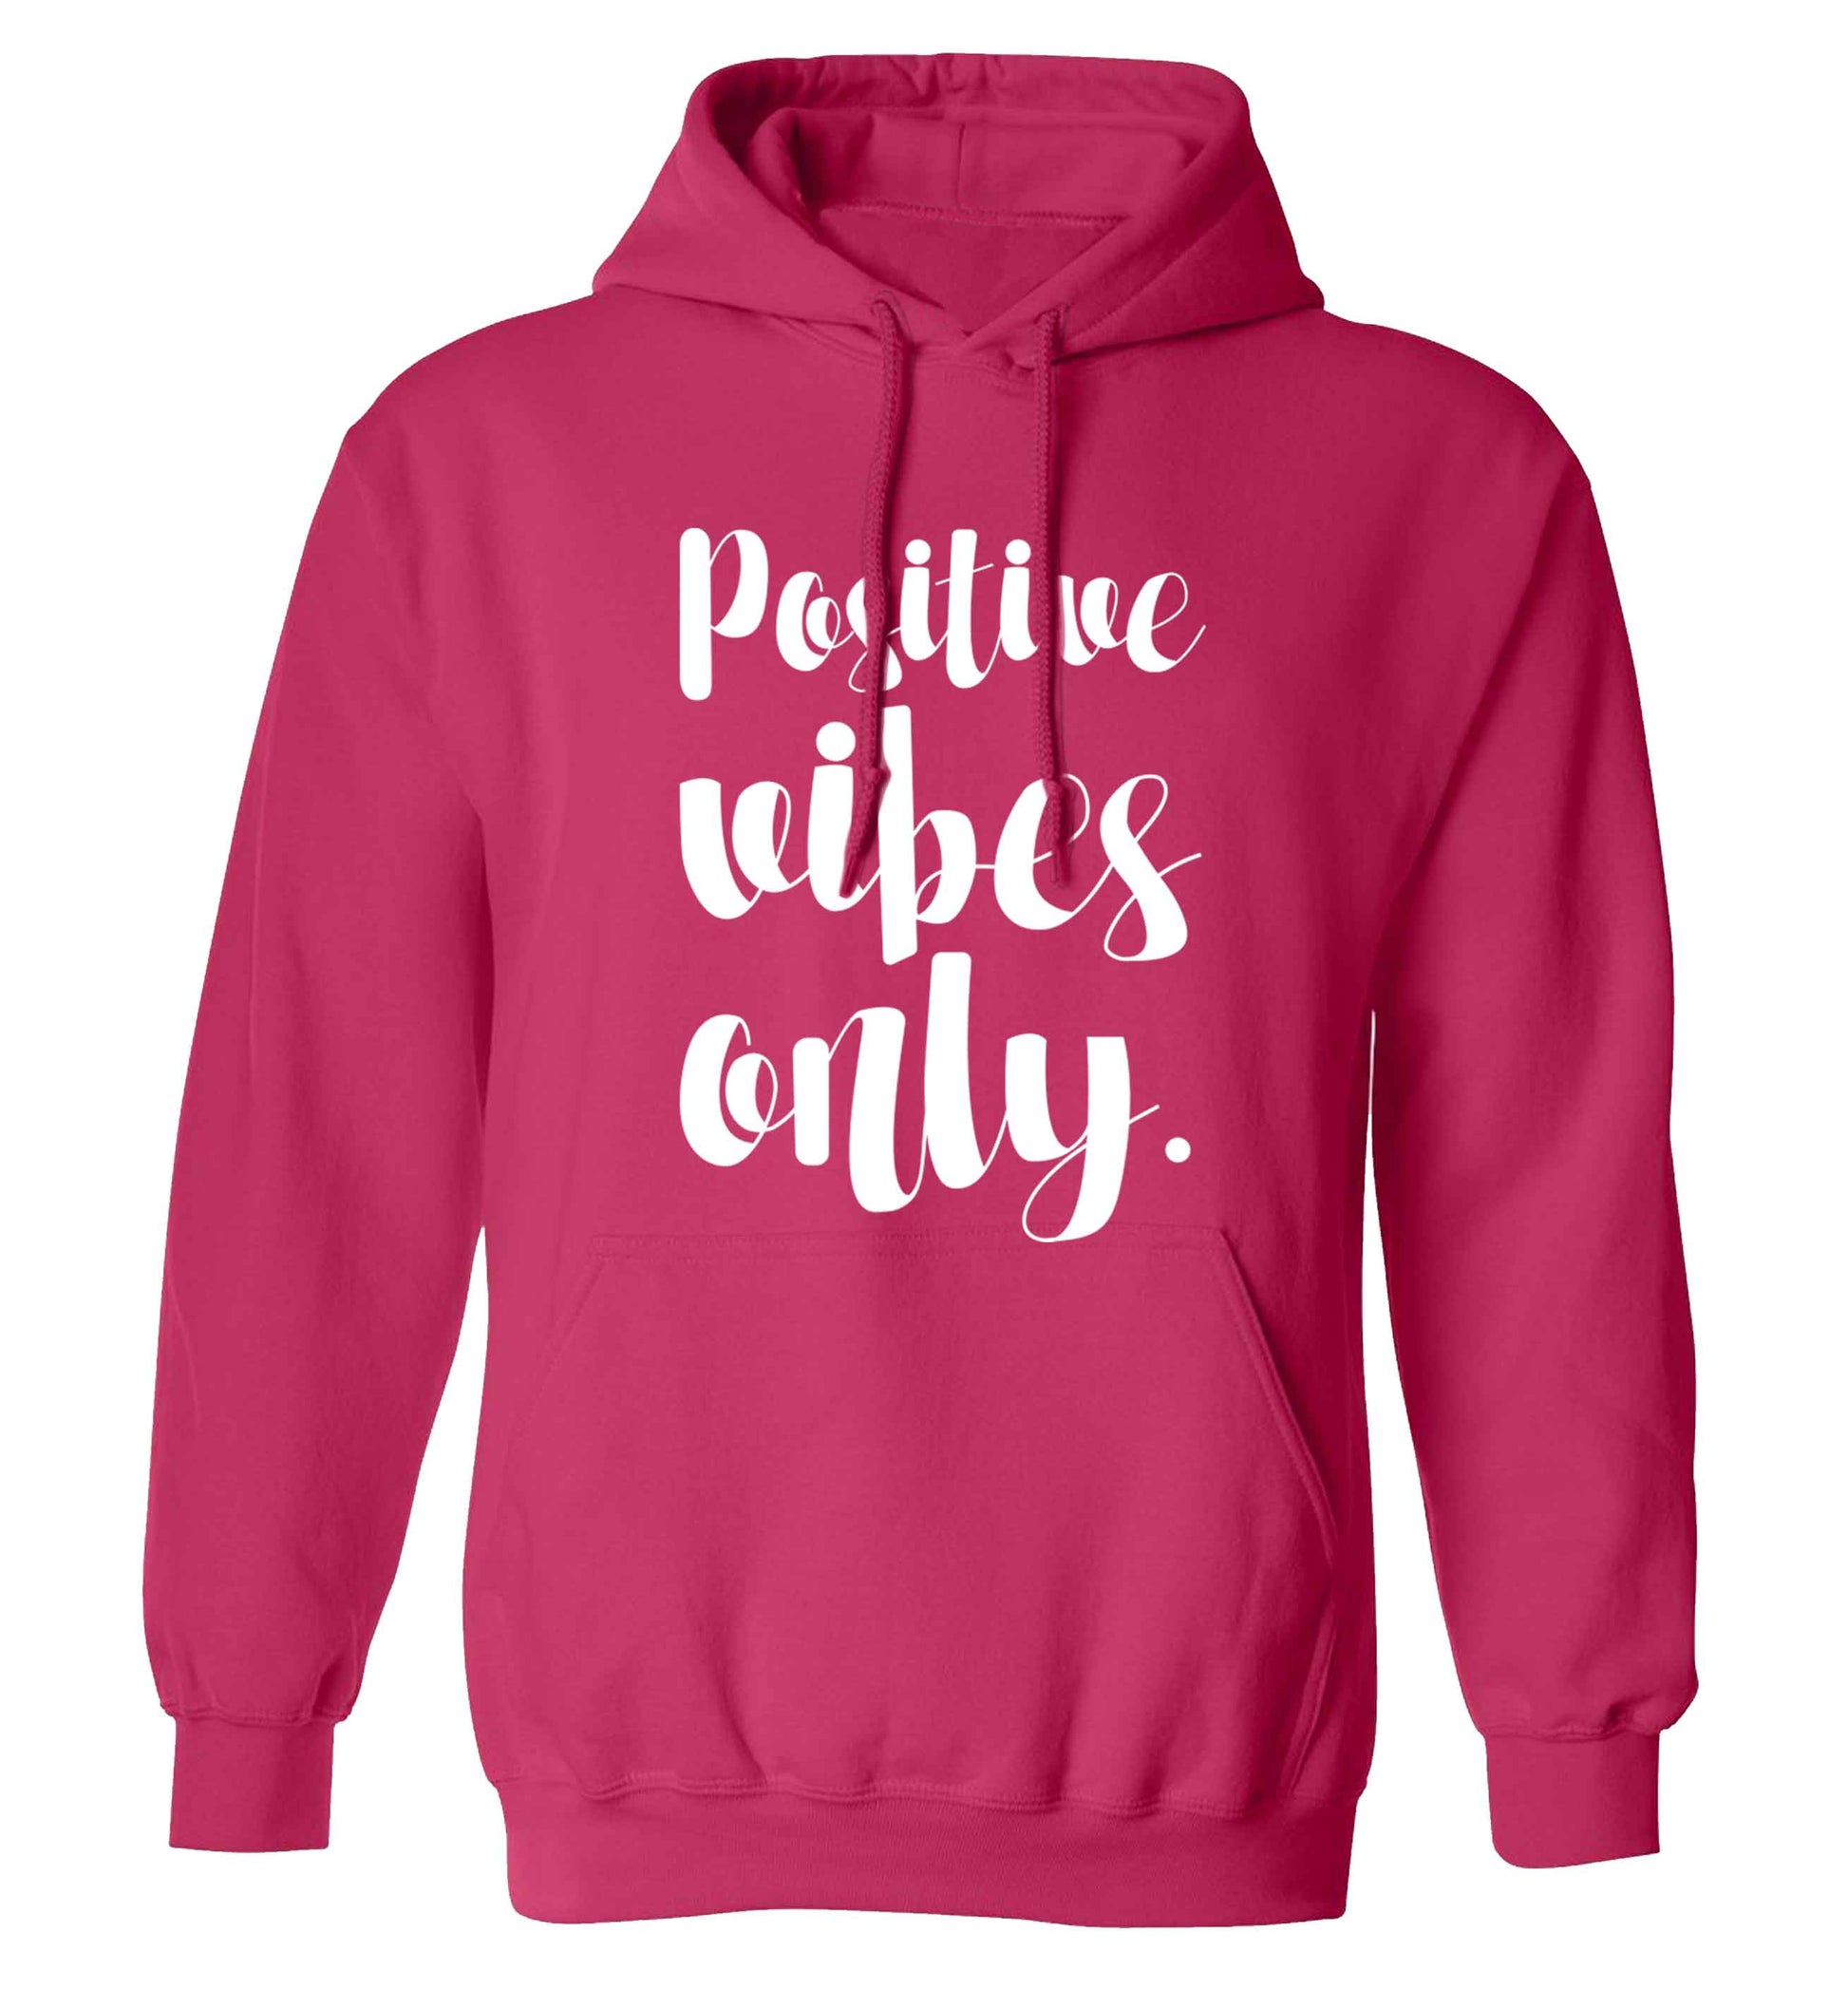 Positive vibes only adults unisex pink hoodie 2XL